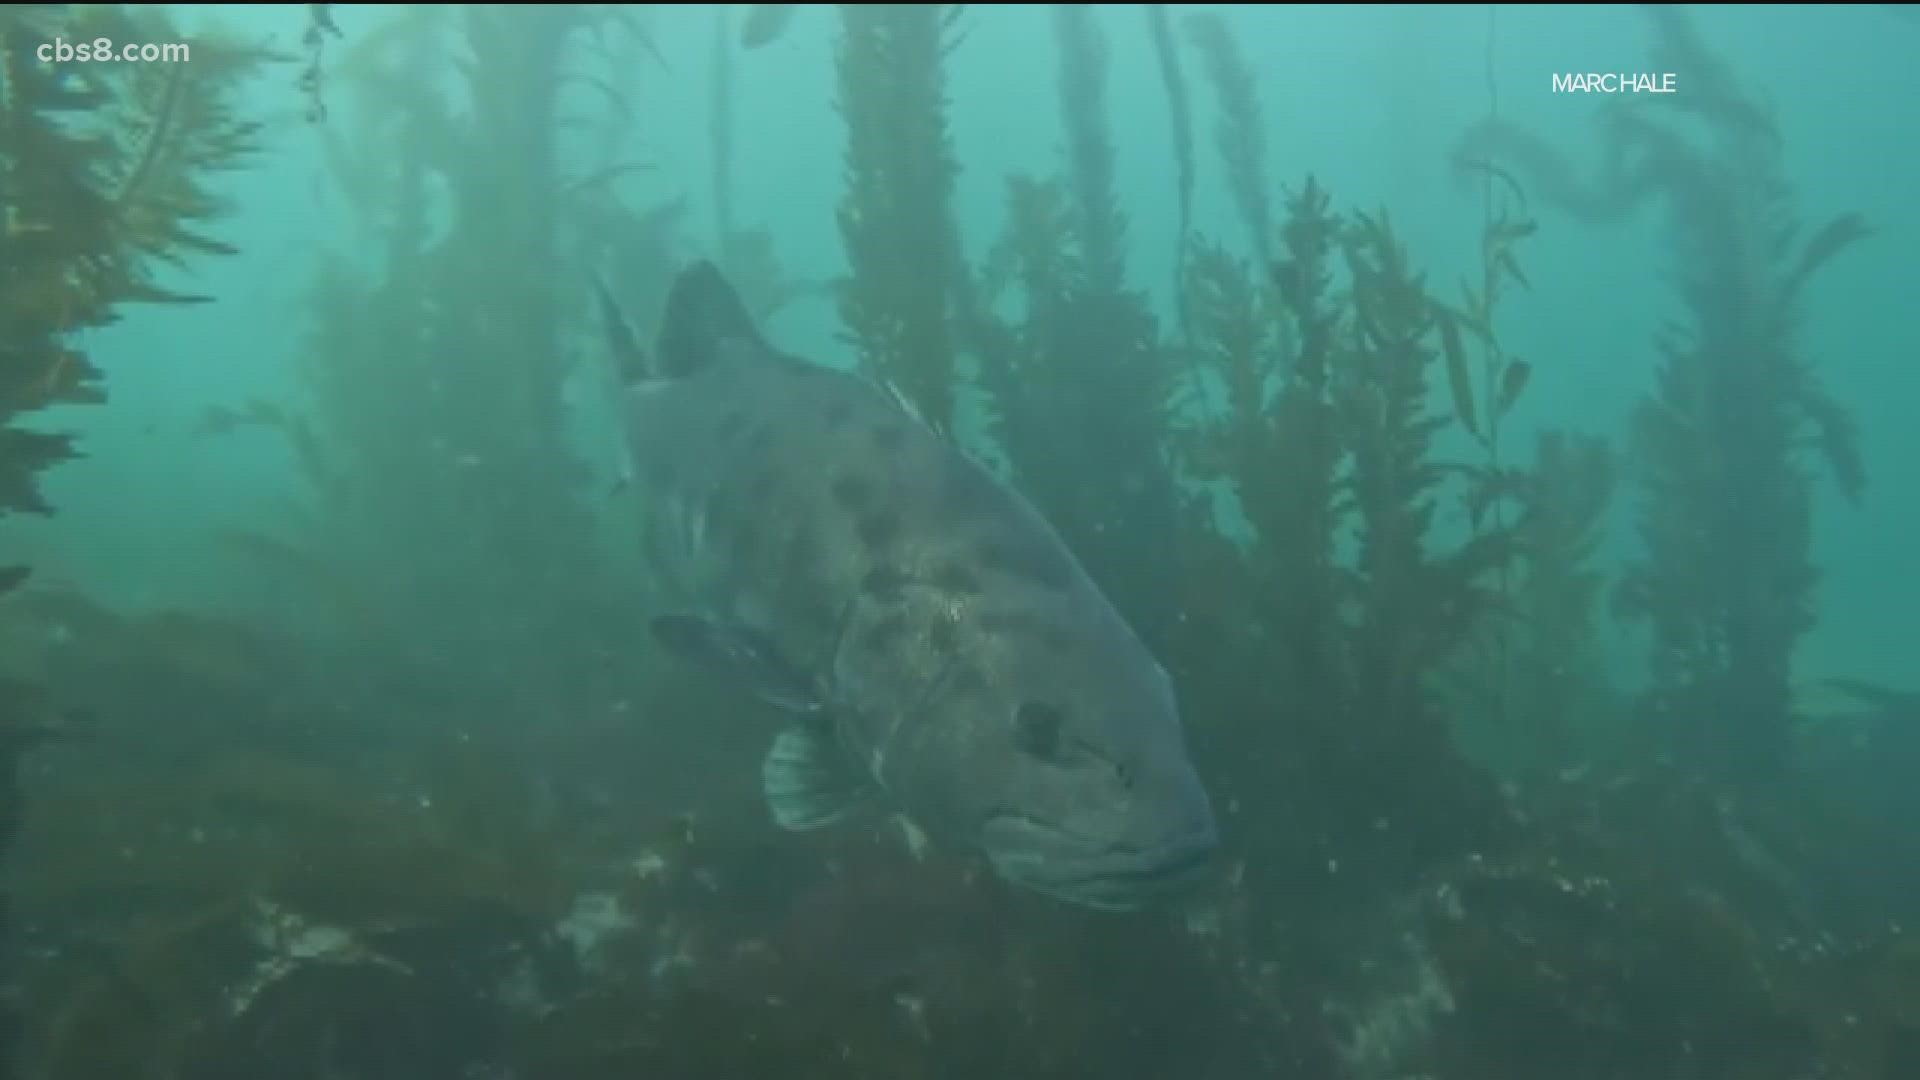 Waterhorse Charters, a diving group, caught this video of a giant sea bass in La Jolla Cove on Sunday, April 10. Credit: Marc Hale